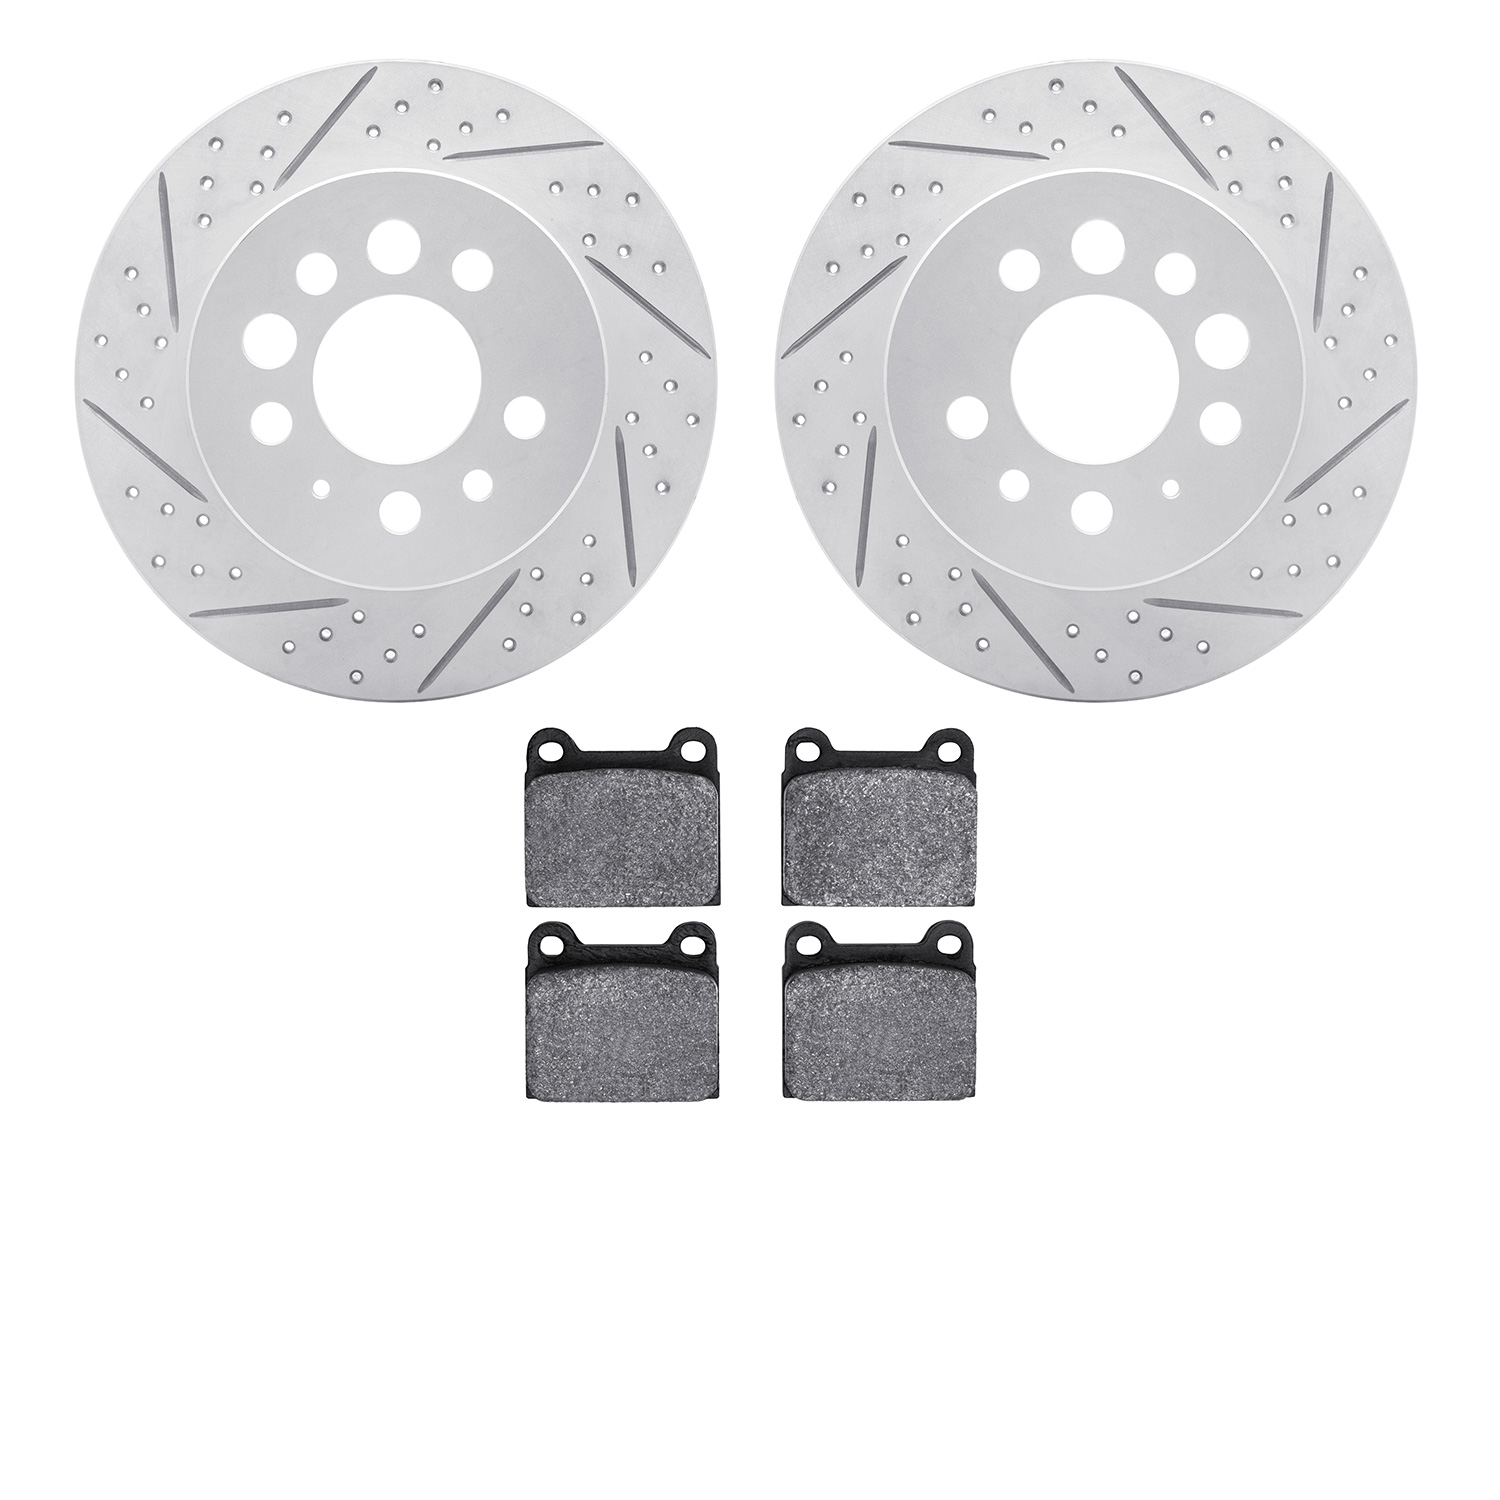 2502-27001 Geoperformance Drilled/Slotted Rotors w/5000 Advanced Brake Pads Kit, 1974-1997 Volvo, Position: Rear